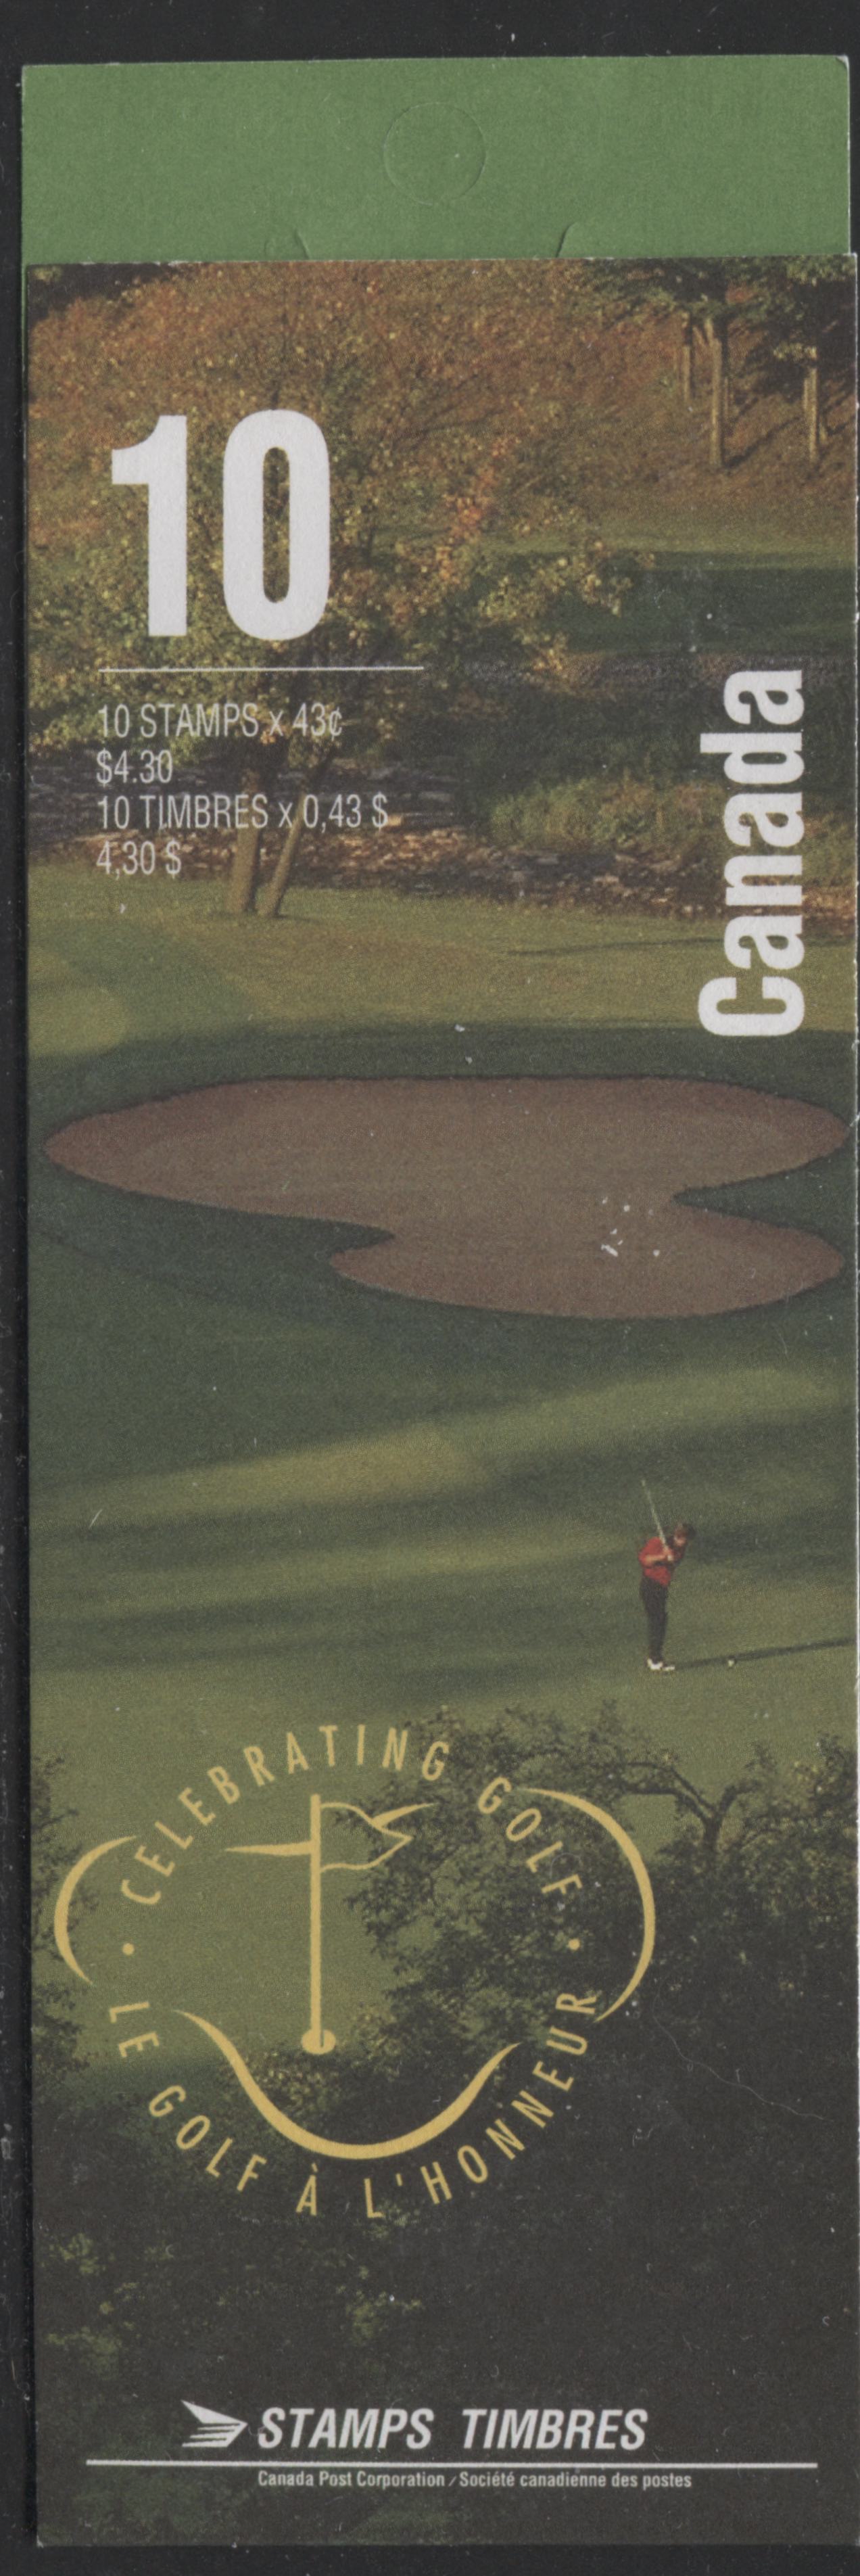 Canada #BK176a-b 1995 Golf in Canada Issue, Complete $4.30 Booklet, Coated Papers Paper, Dead Paper, 4 mm GT-4 Tagging Brixton Chrome 